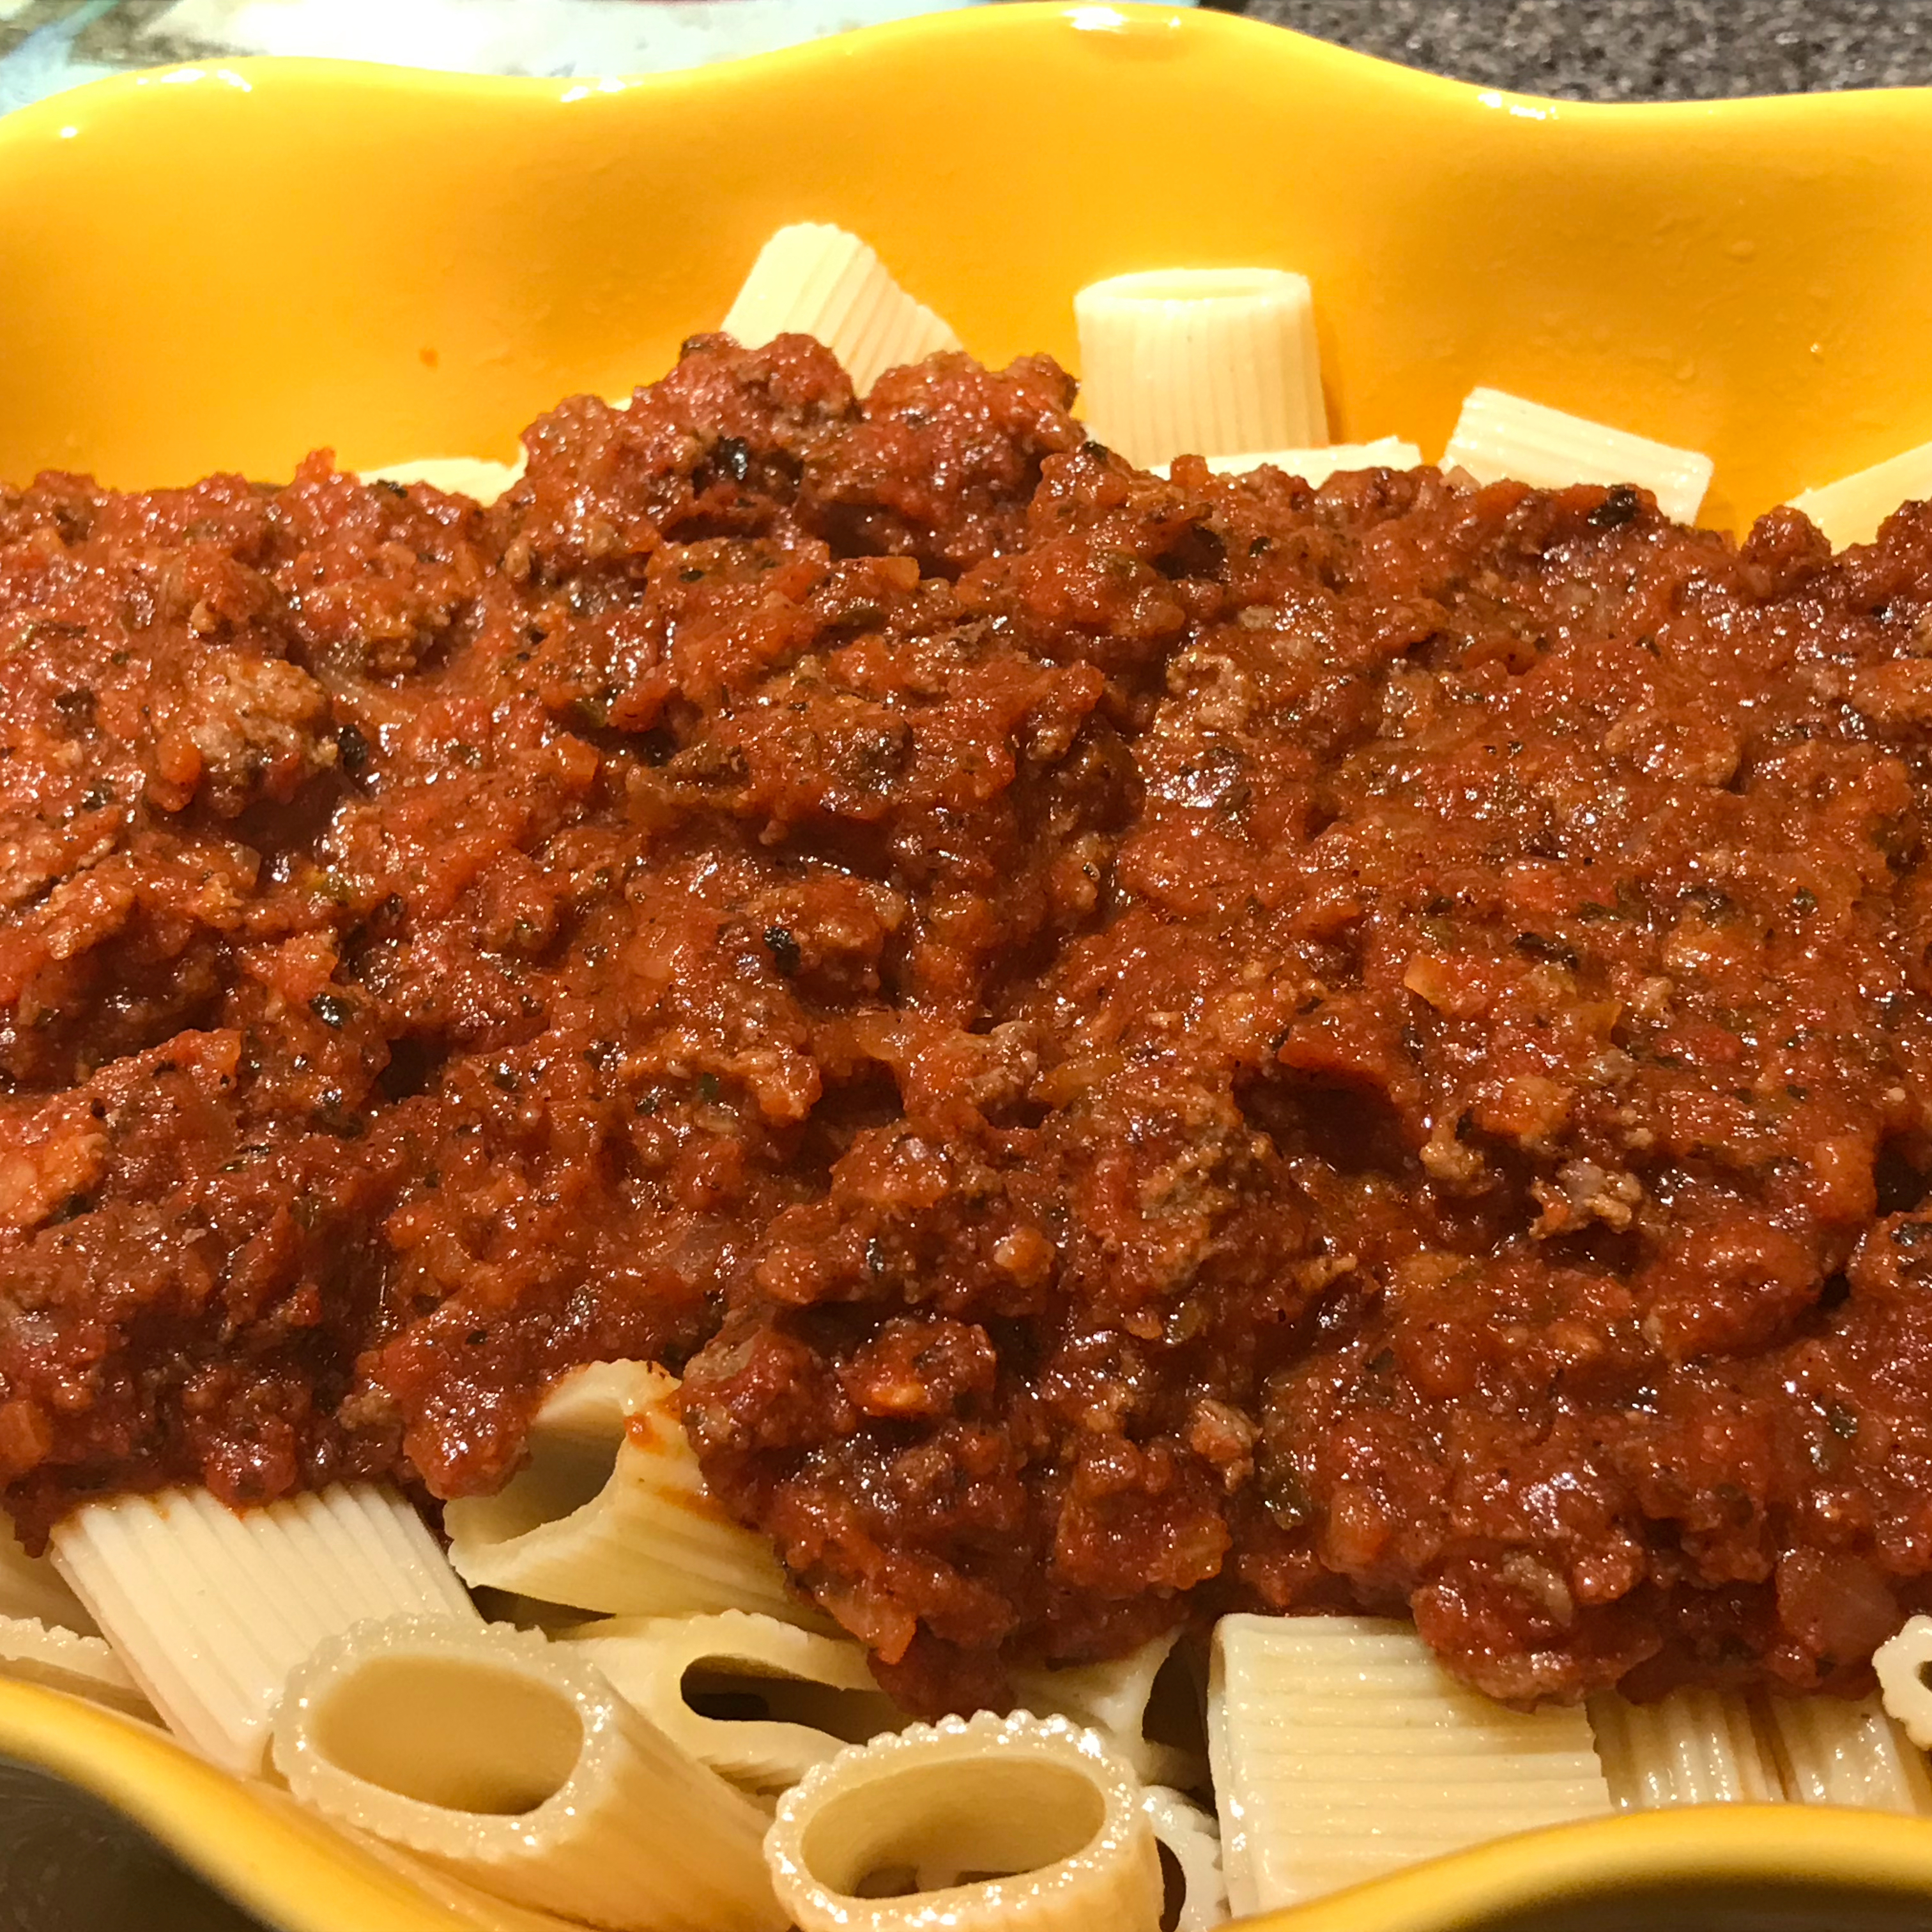 Tami's Red Sauce: Bolognese Tomato Sauce with Ground Beef